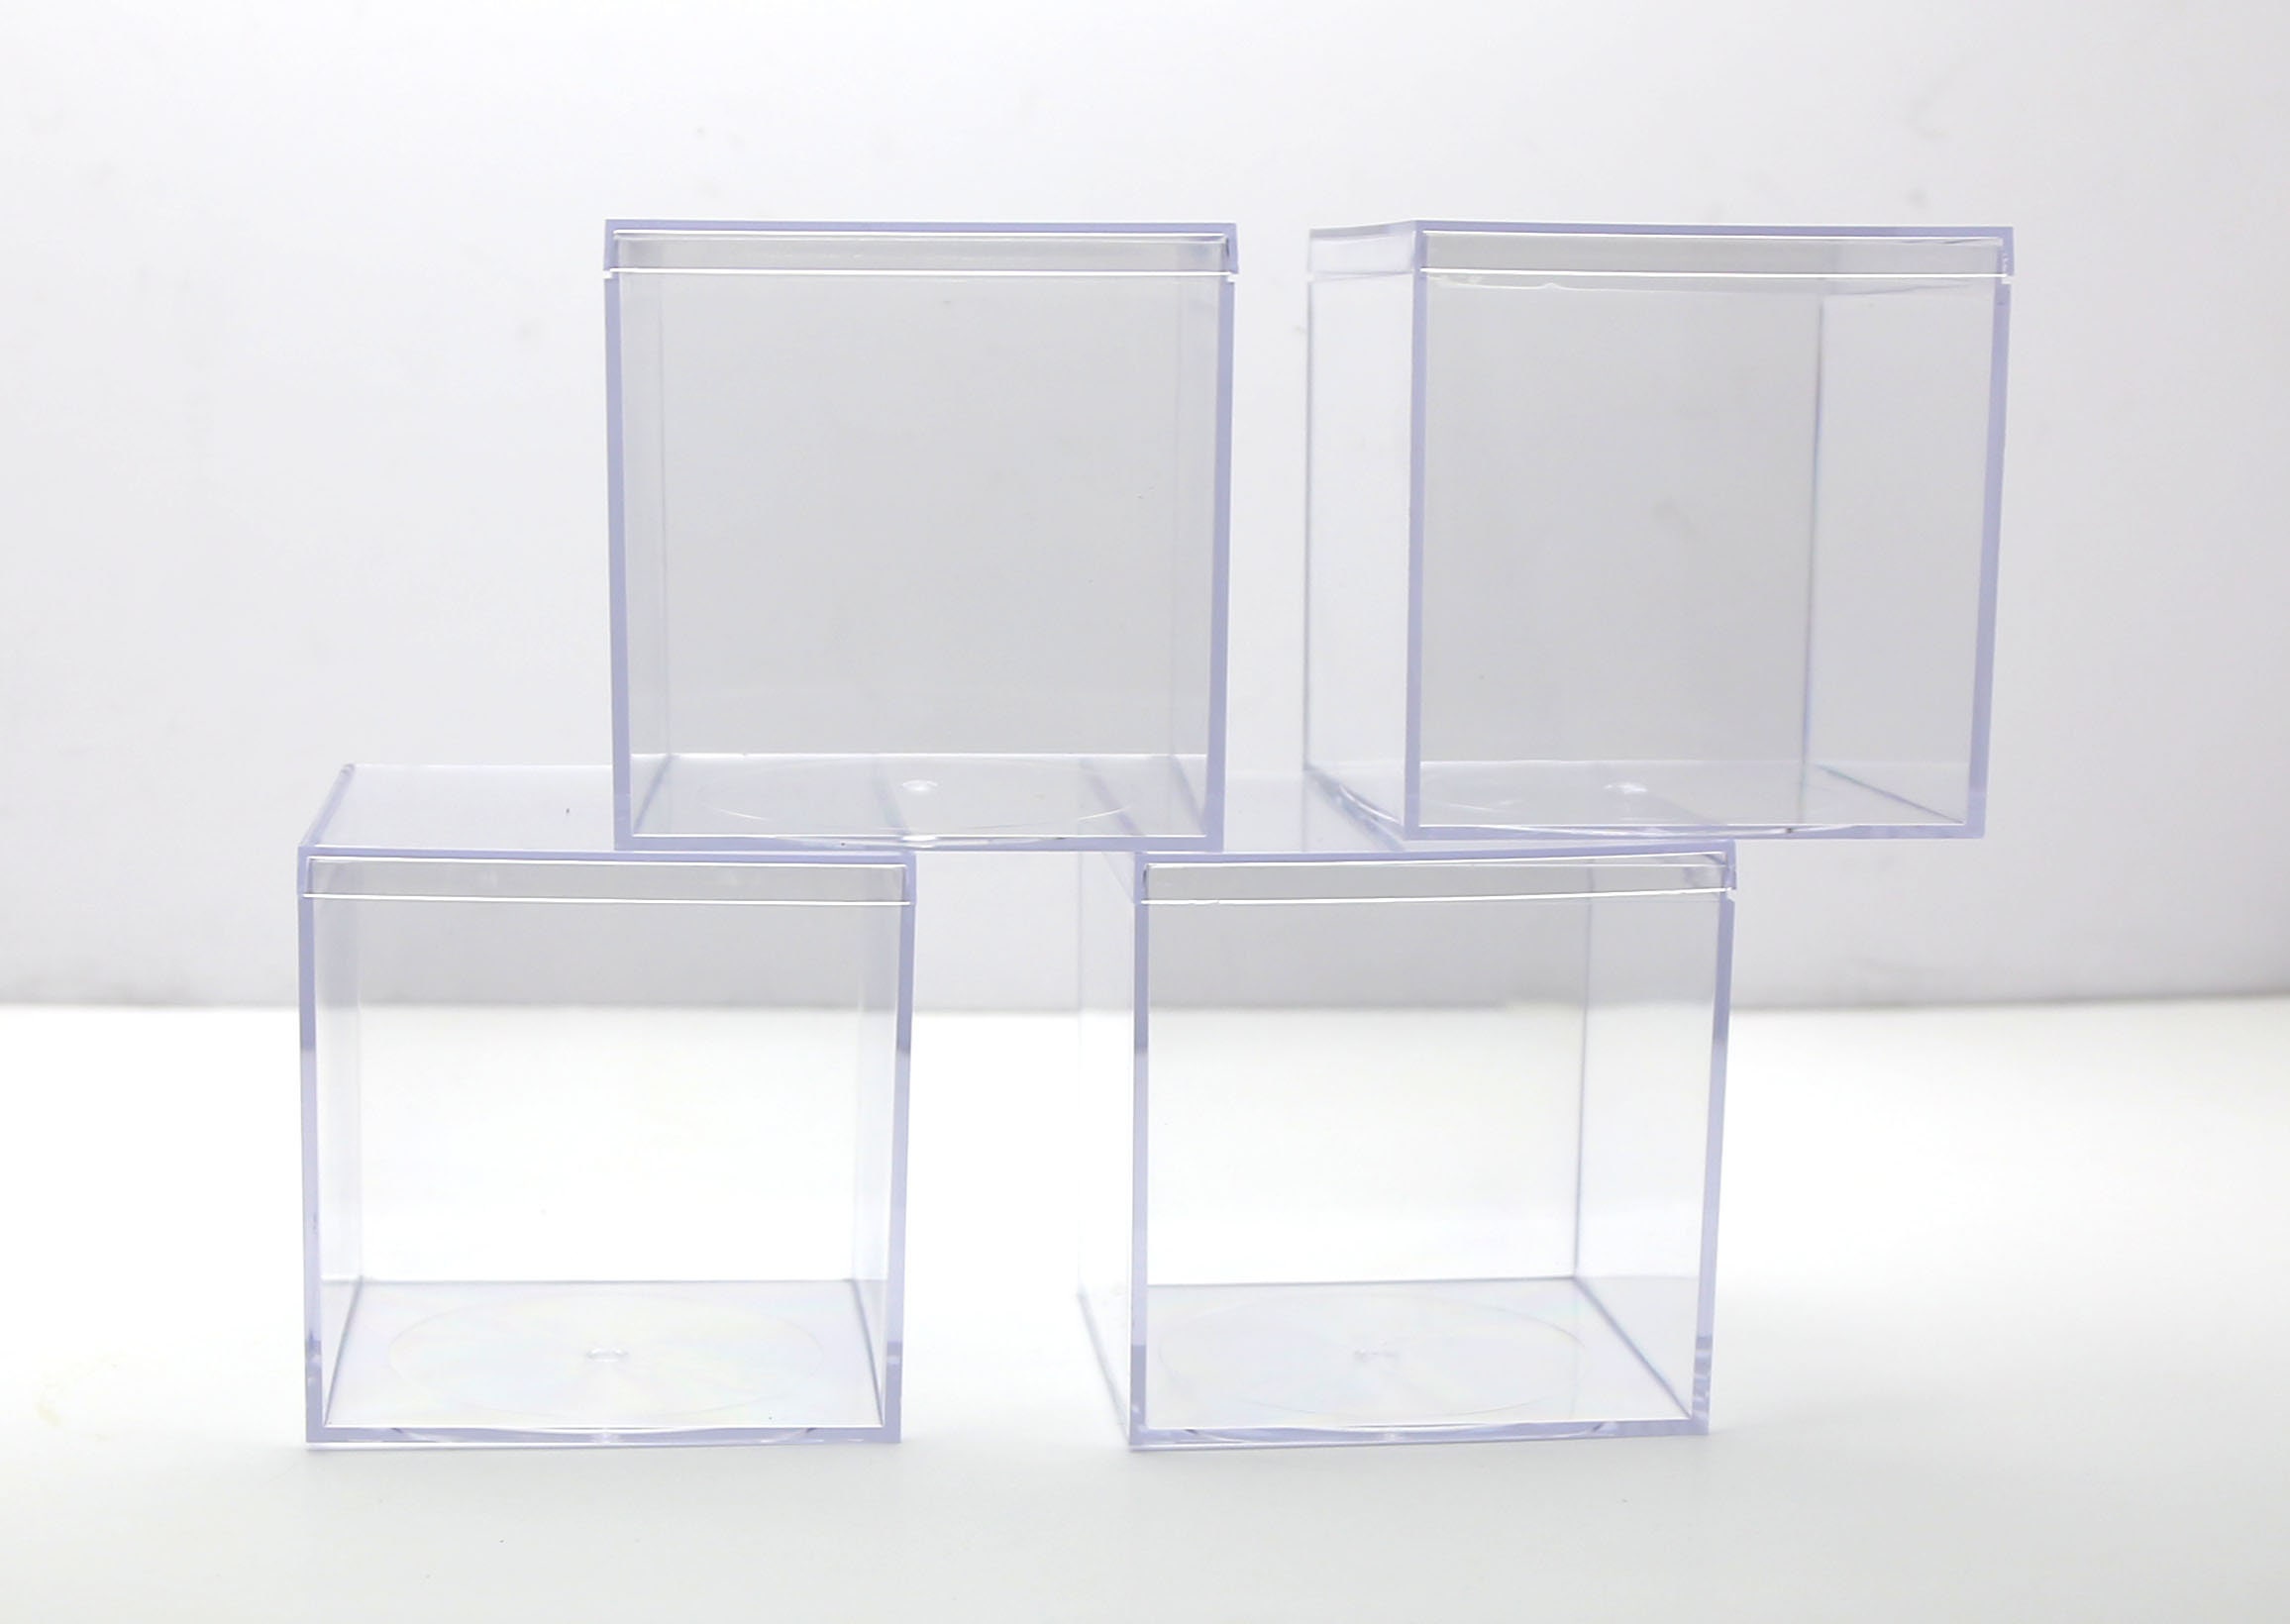  Clear Acrylic Box with Lid Plastic Clear Acrylic Square Cube  Acrylic Display Box for Storage Acrylic Stackable Container for Pill Candy  Jewelry Gift Card Party Favors 2.9 x 2.9 x 2.9